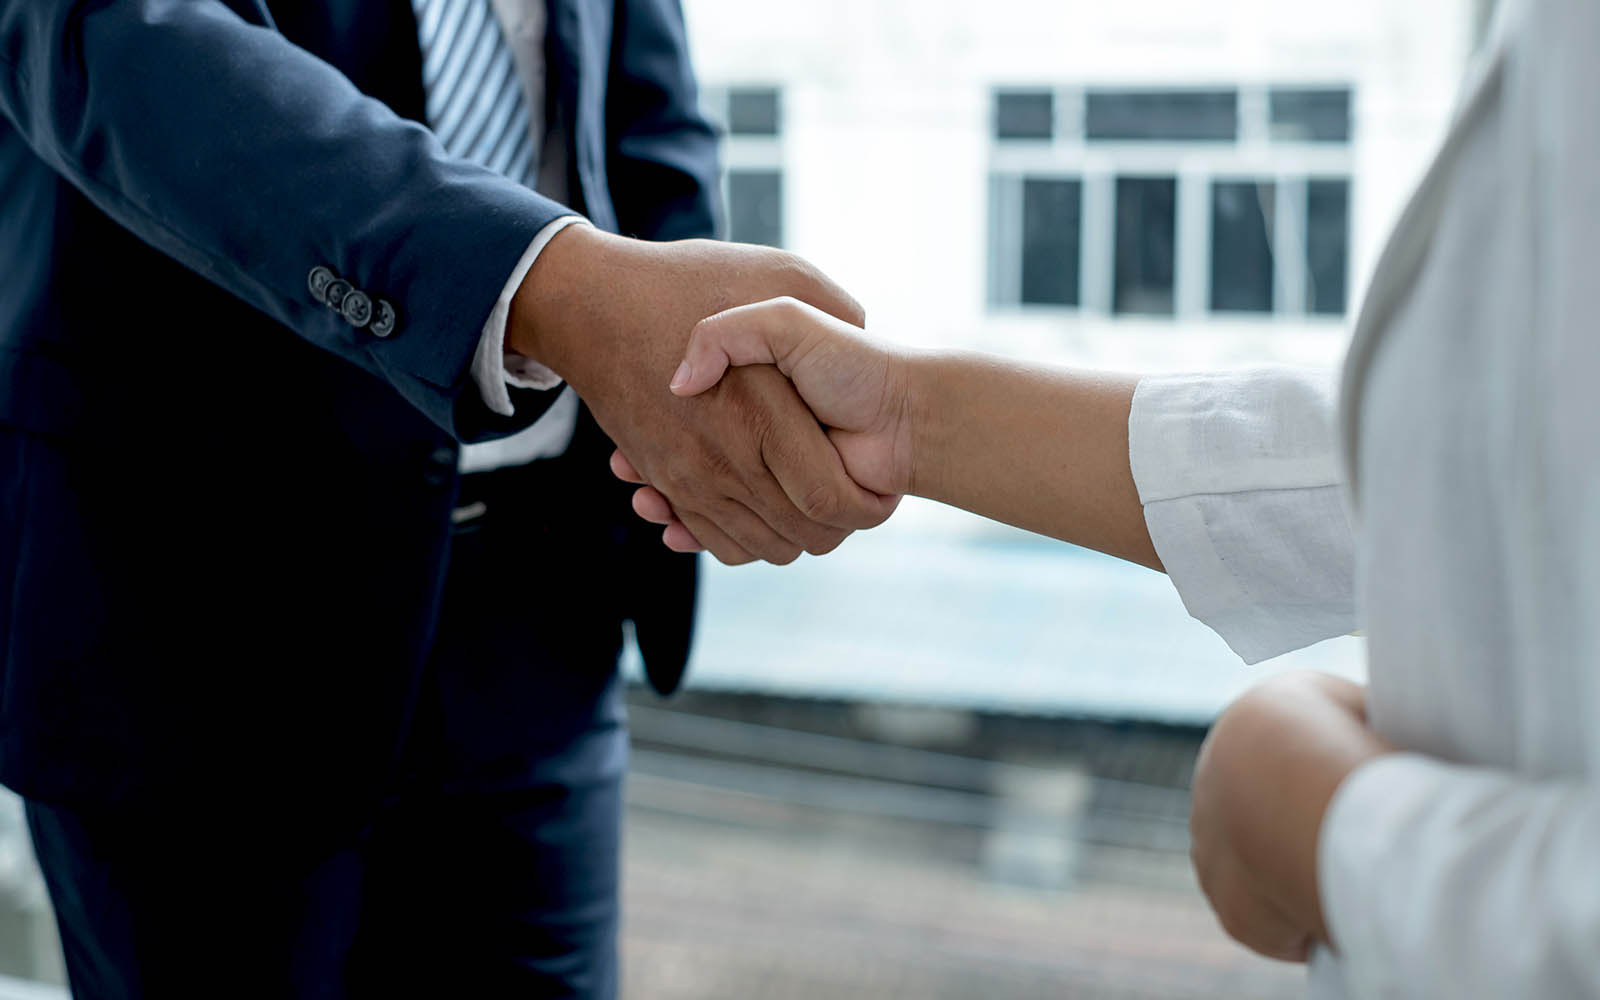 Business people shake hands after a meeting was successful and agreed upon